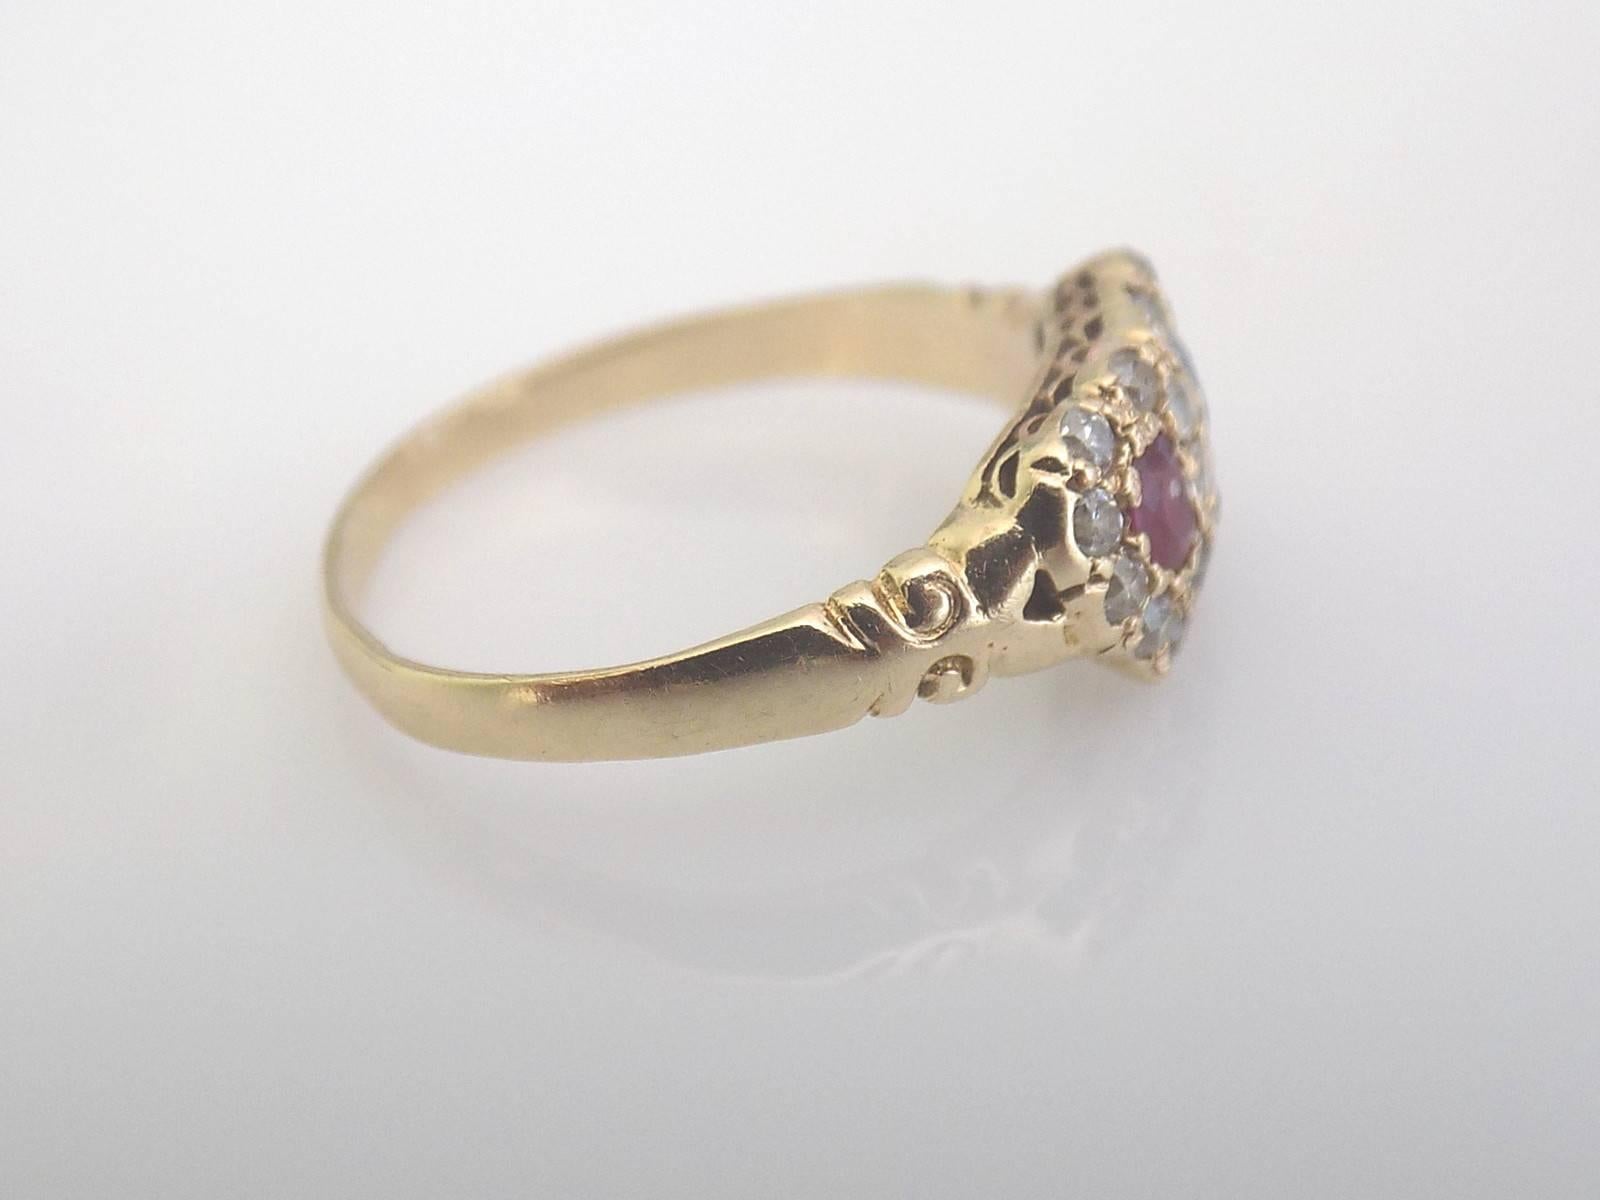 A Lovely Antique Victorian 15 carat gold, Ruby, Sapphire and Diamond Double Heart love ring on fancy shoulders. English Origin. 
Size L 1/2 UK, 5.75 US.
Height of the face 7mm. 
Weight 1.8gr.
Marked 15CT for 15 Carat Gold.

